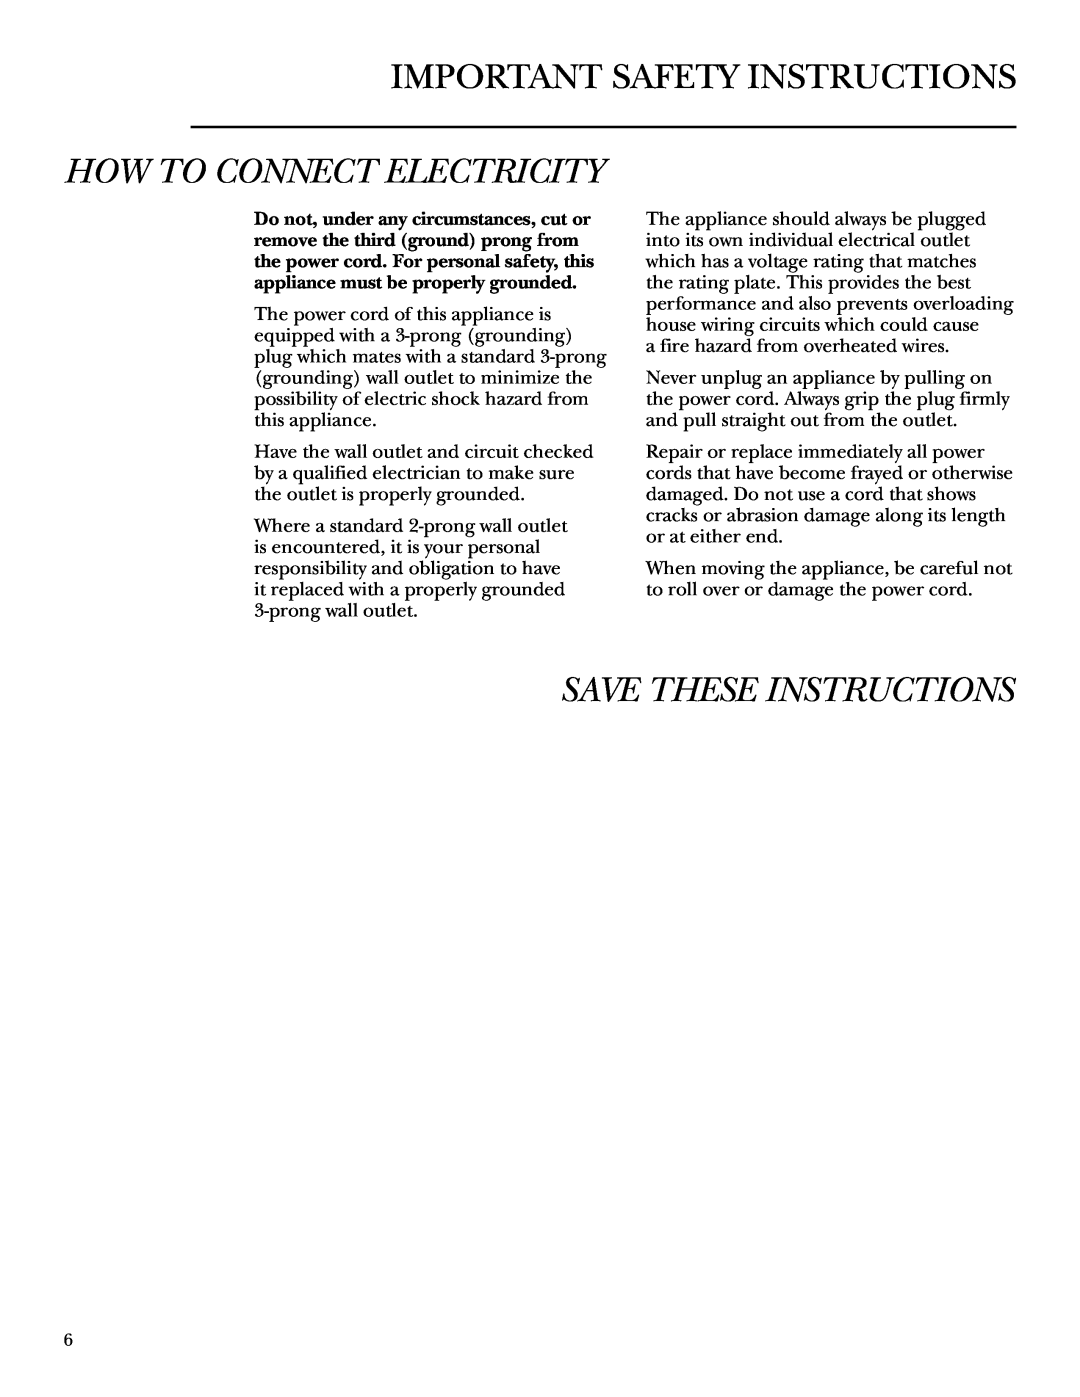 GE ZDWR240 owner manual How To Connect Electricity, Save These Instructions, Important Safety Instructions 